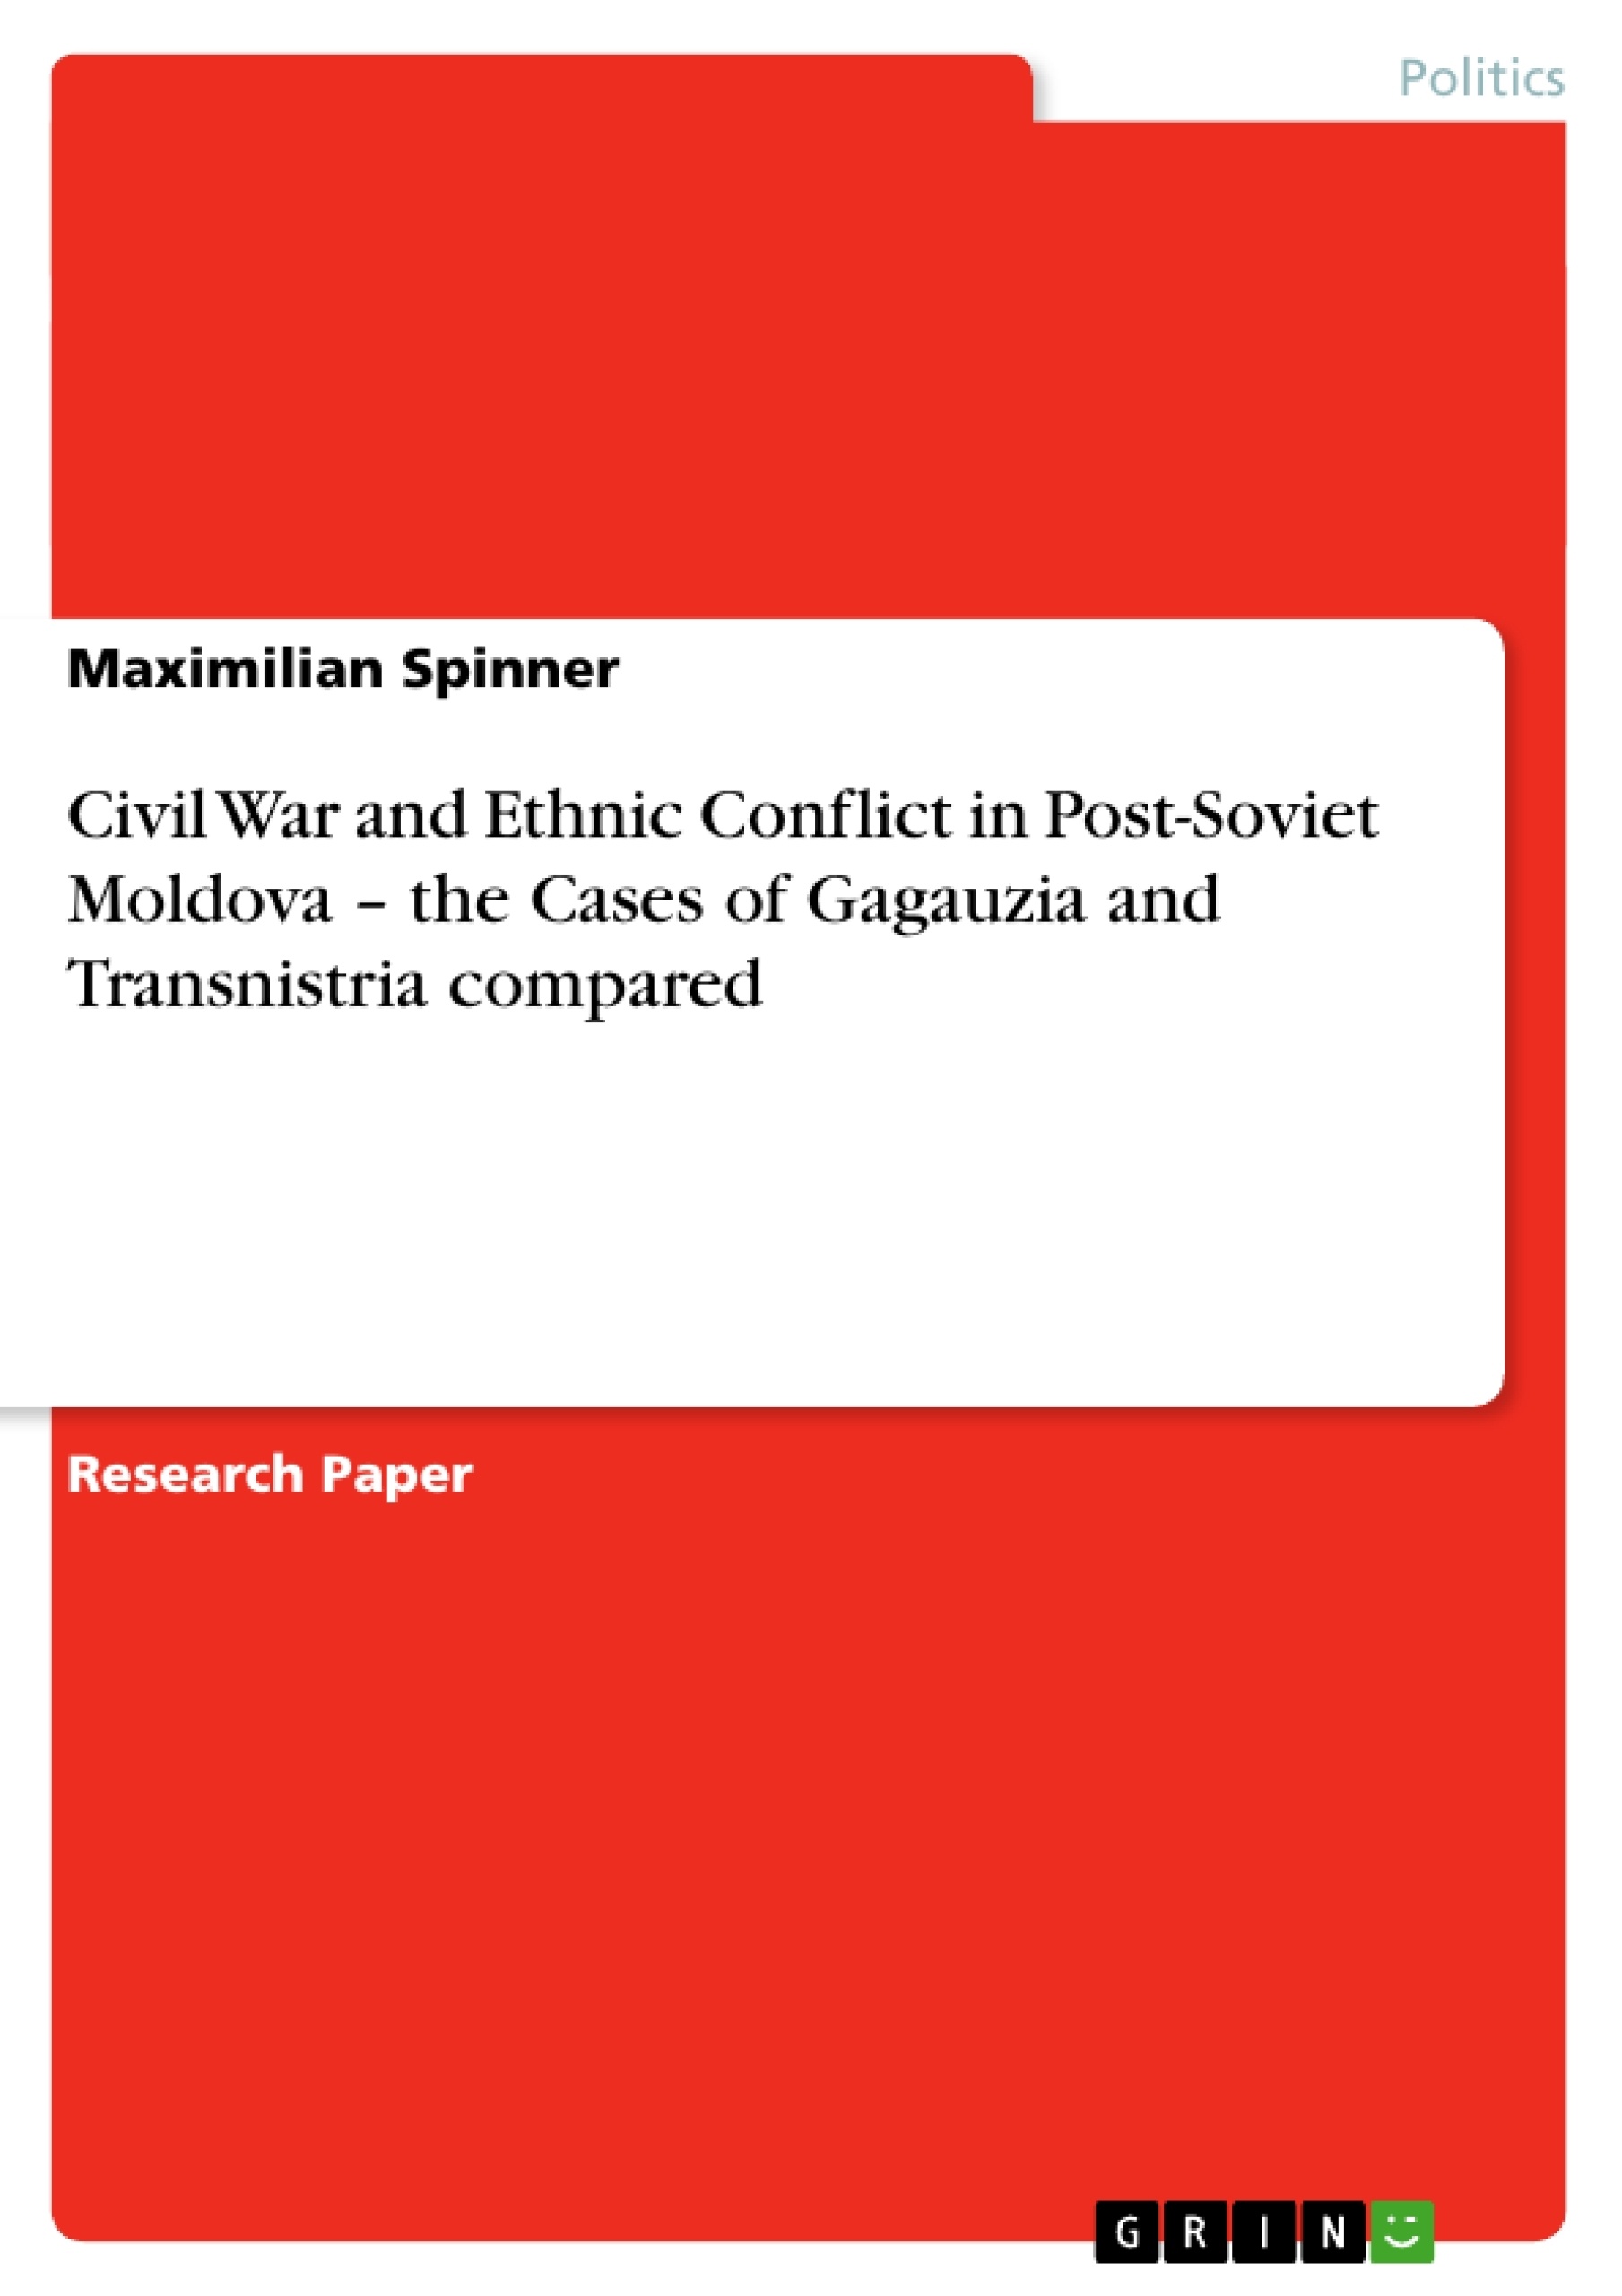 Title: Civil War and Ethnic Conflict in Post-Soviet Moldova – the Cases of Gagauzia and Transnistria compared